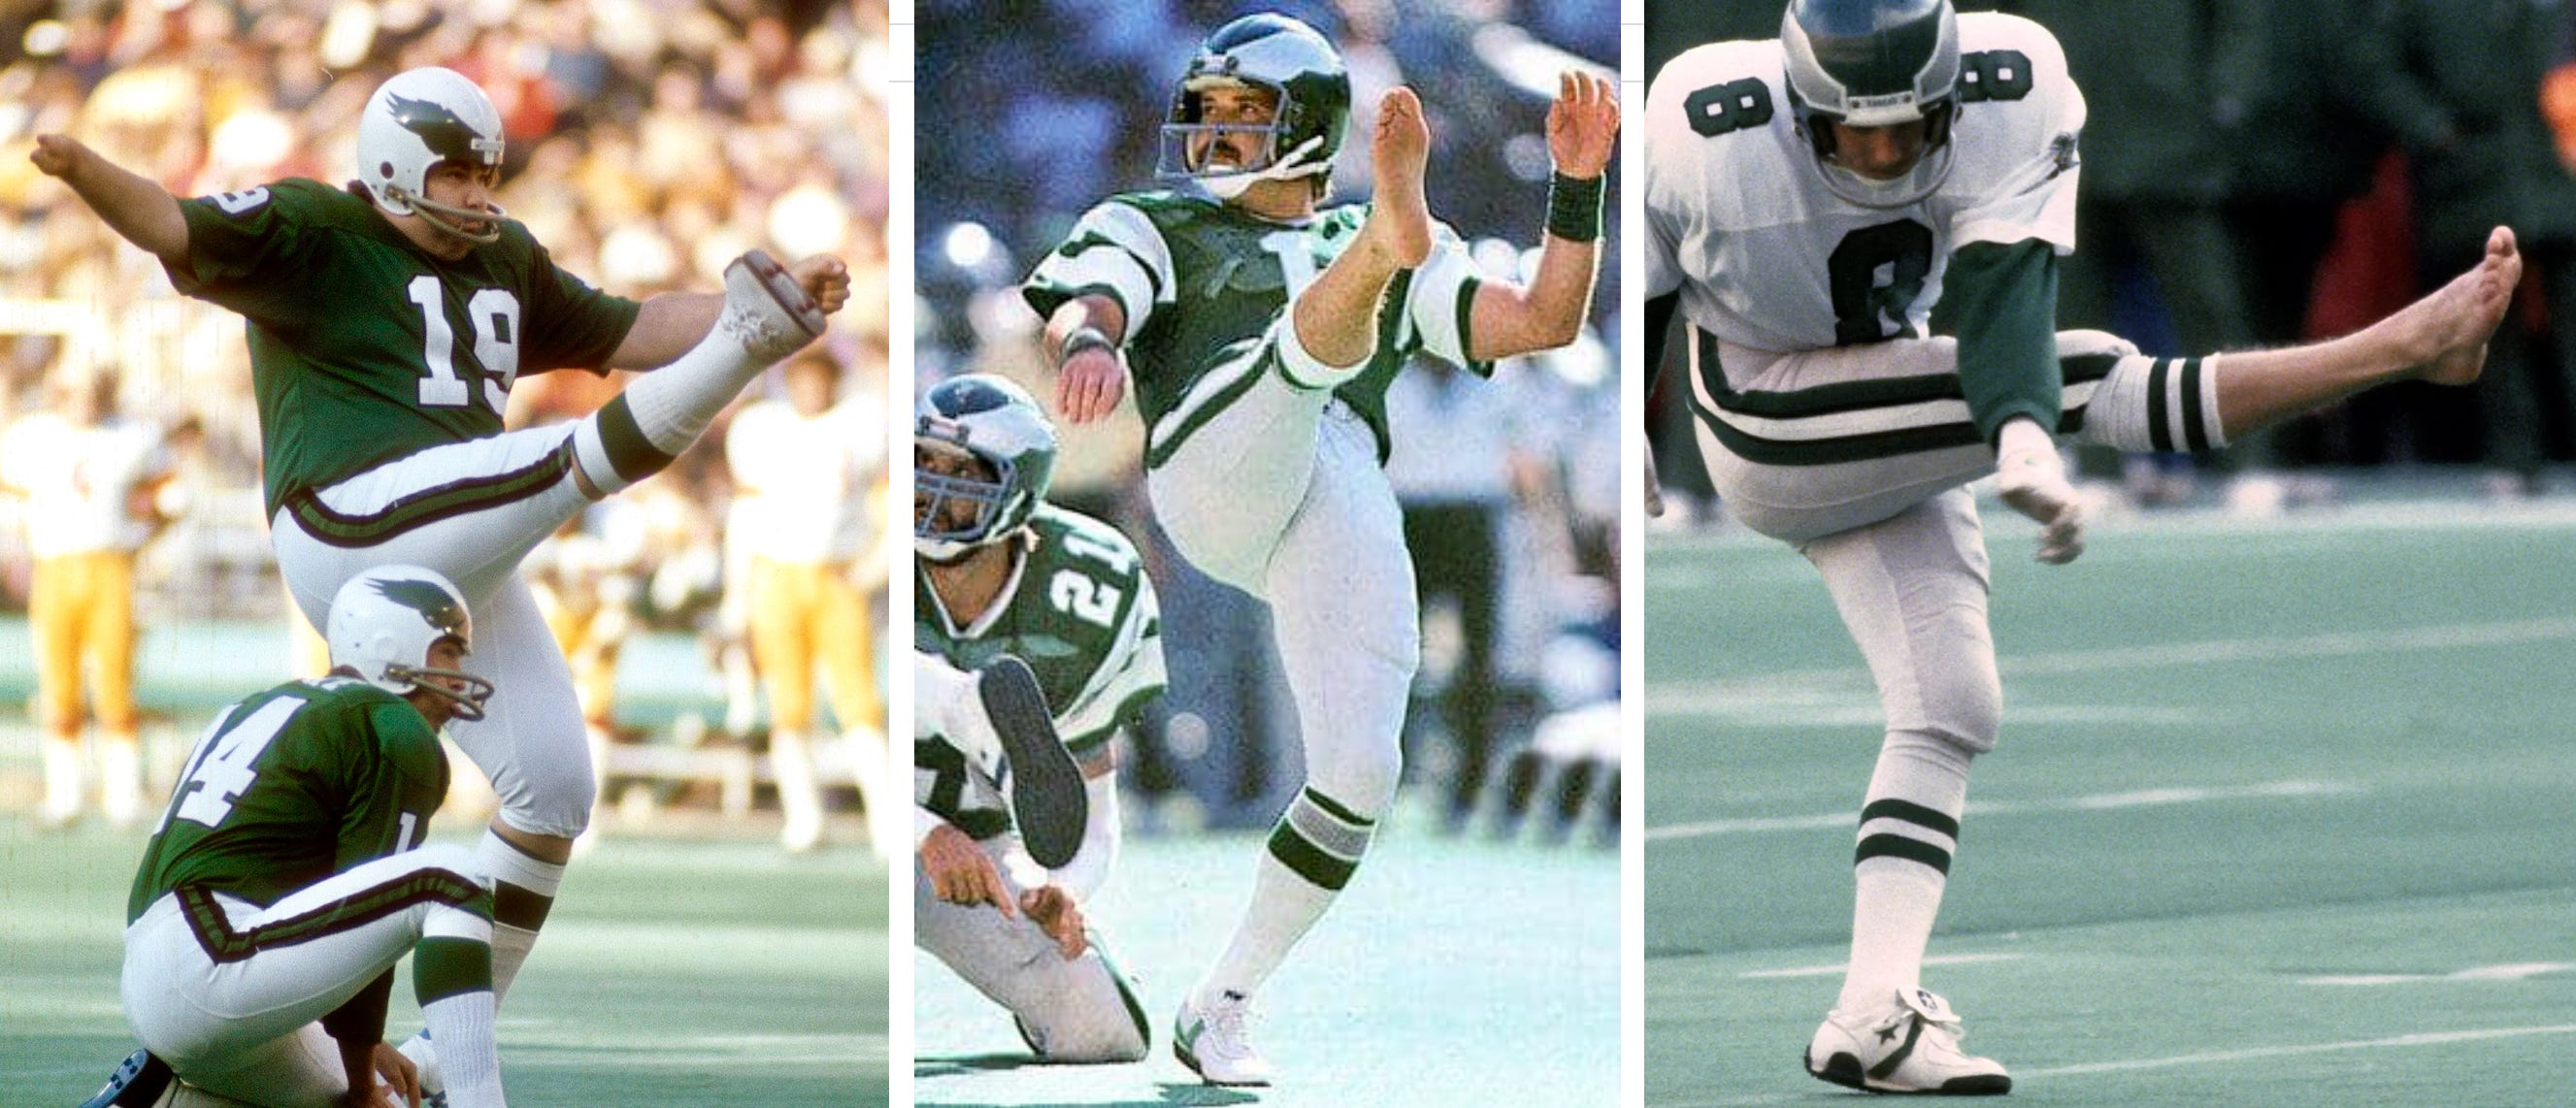 The inside story of how the Kelly Green uniforms became a reality